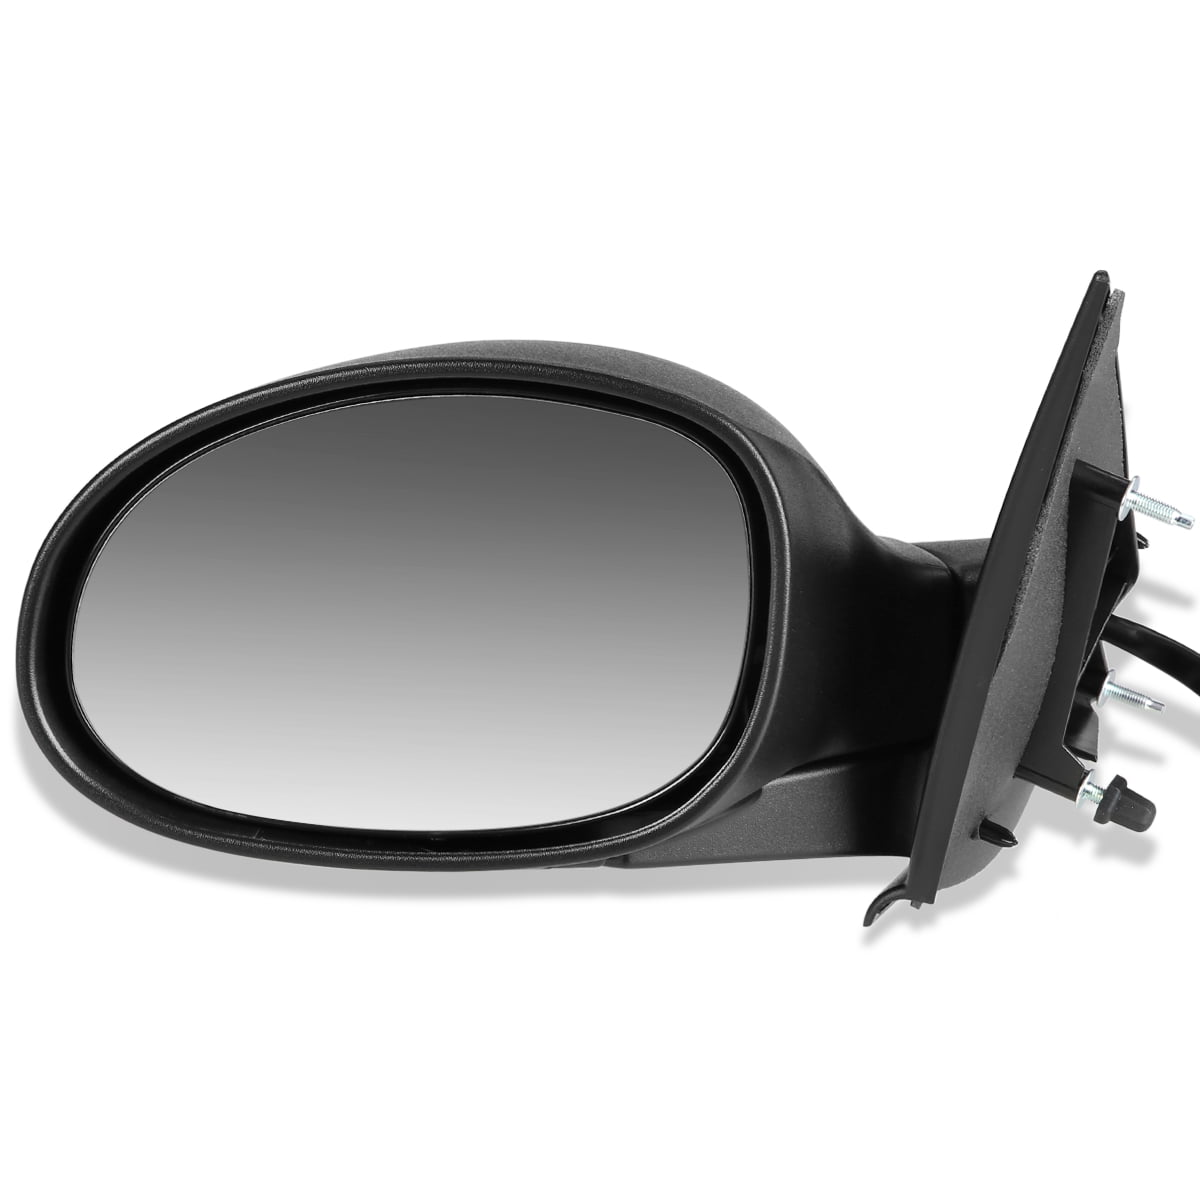 Fit System 99124 Toyota Camry Driver/Passenger Side Replacement Mirror Glass